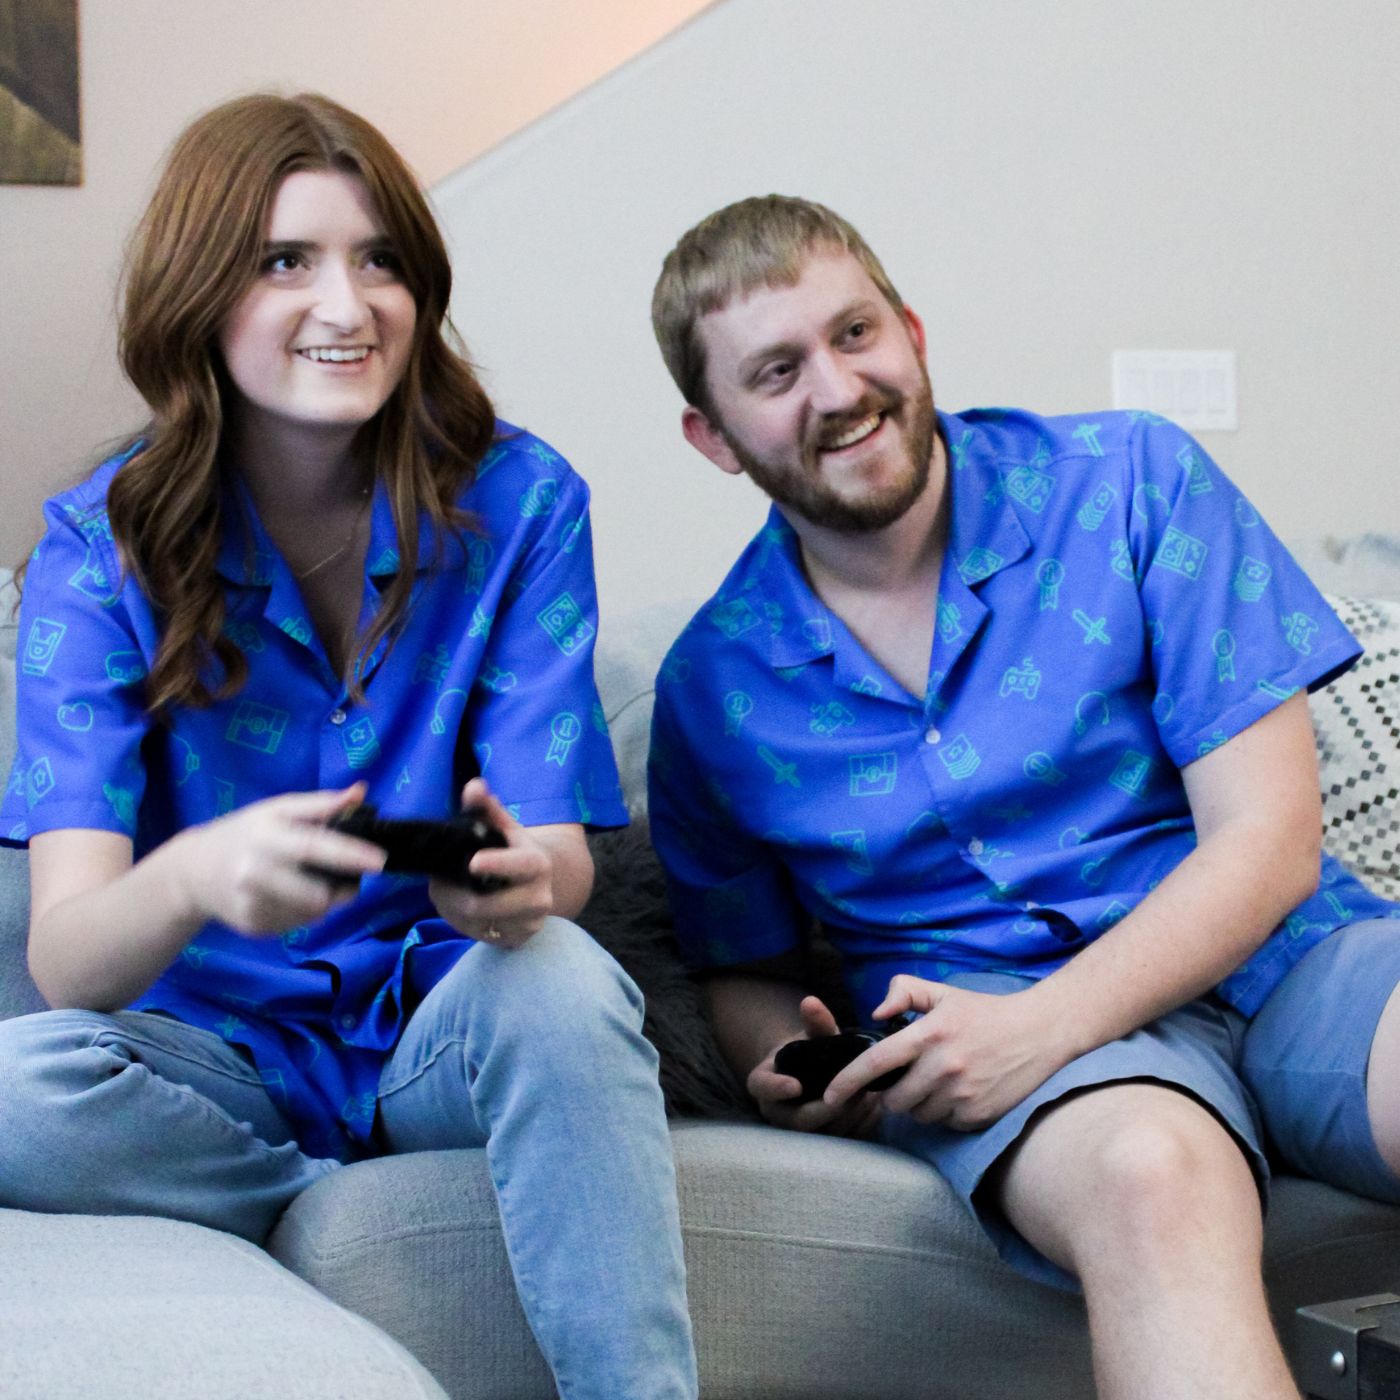 A man and woman are sitting with gaming controllers wearing matching video game button up shirts. The prints have gamer icons typically seen in a video game.